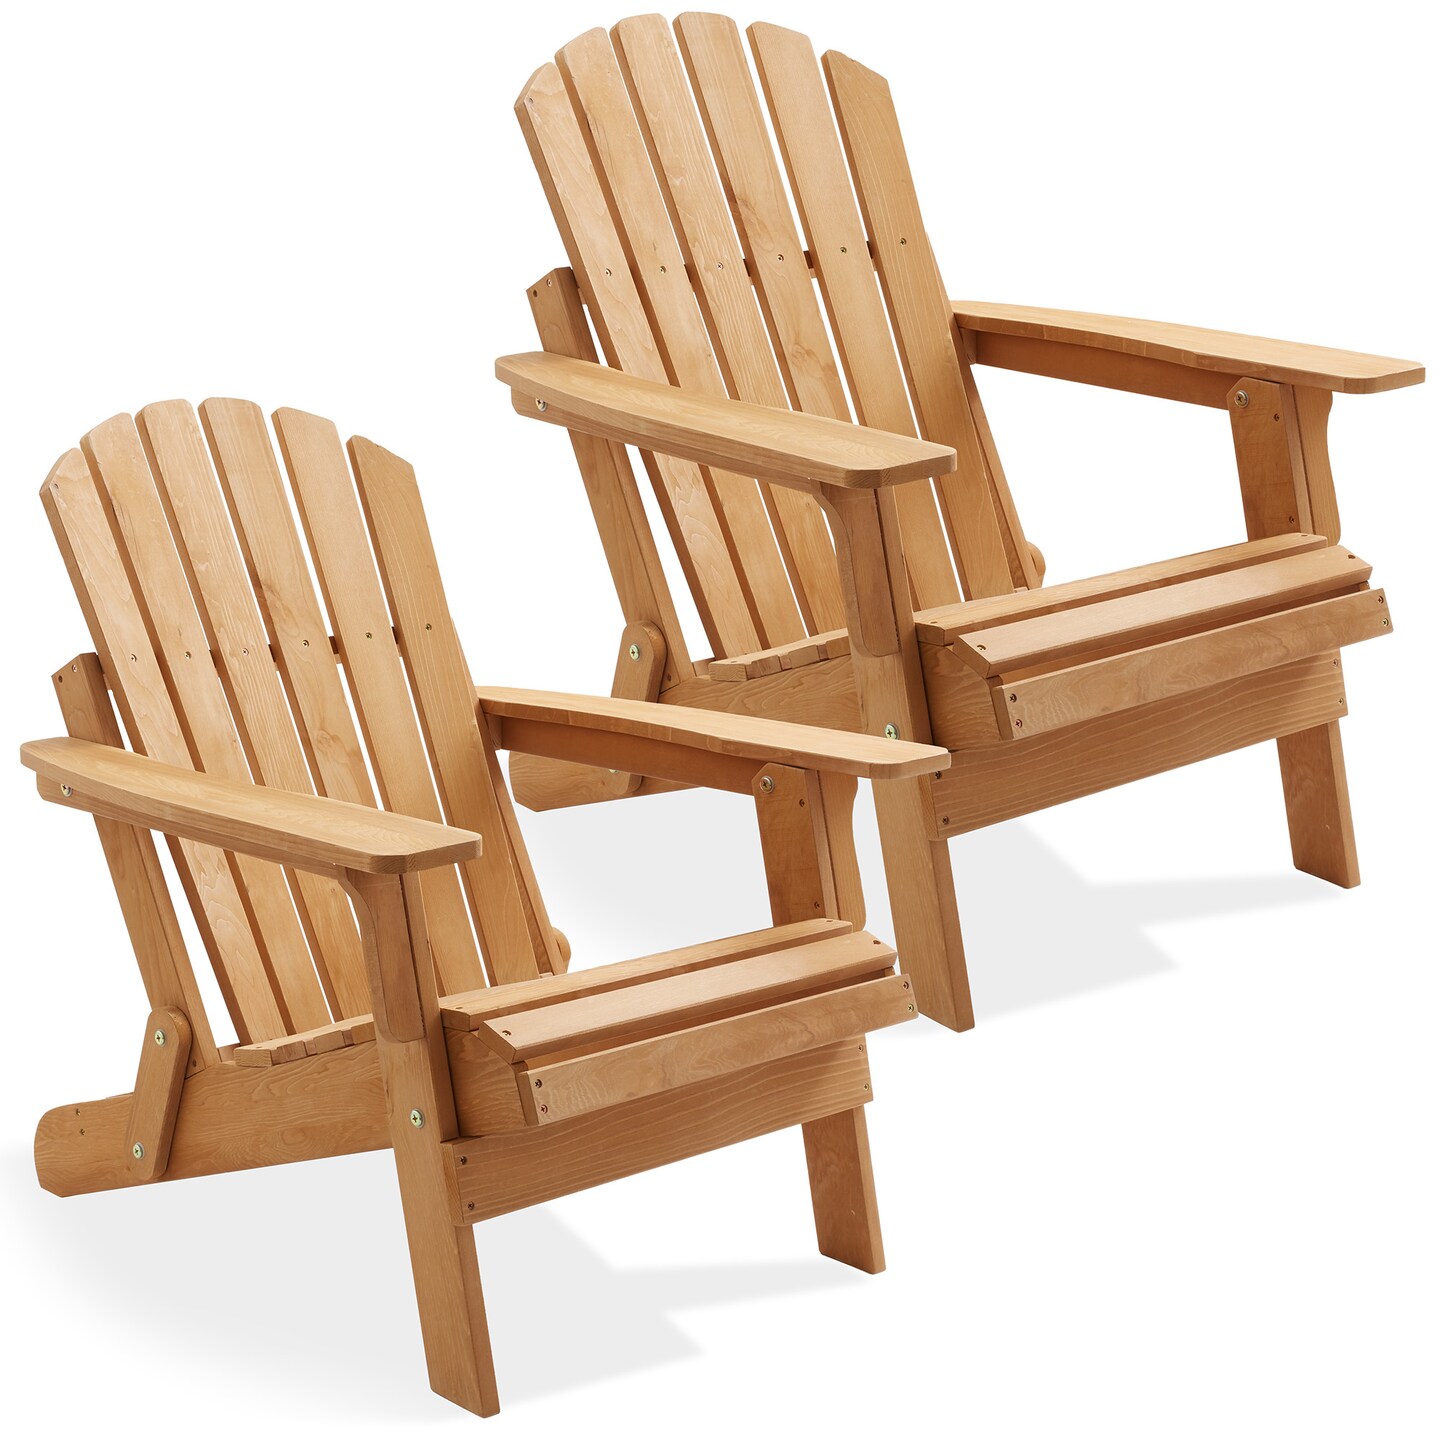 Casafield Oversized Folding Adirondack Chair, Set of 2 Cedar Wood Outdoor Fire Pit Lounge Chairs for Patio, Deck, Yard, Lawn and Garden Seating, Partially Pre-Assembled - Natural